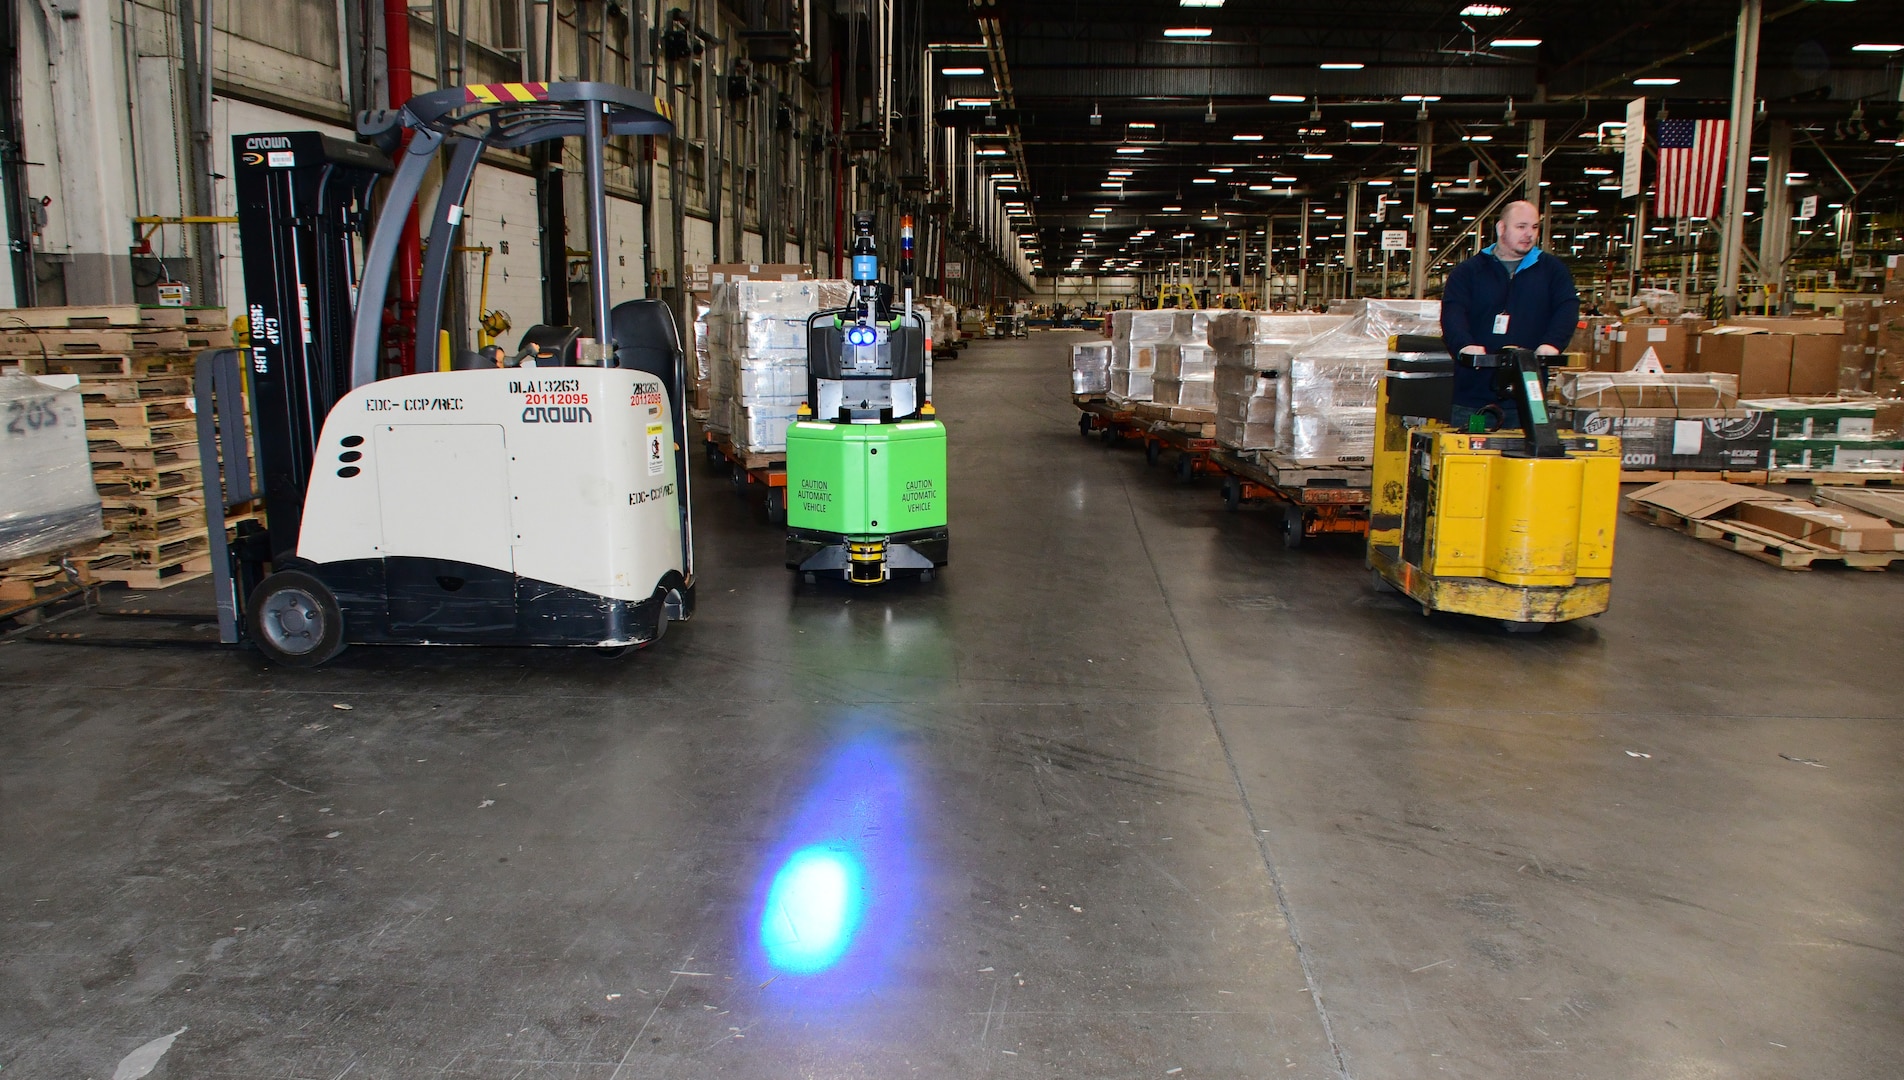 Automated vehicles in a warehouse